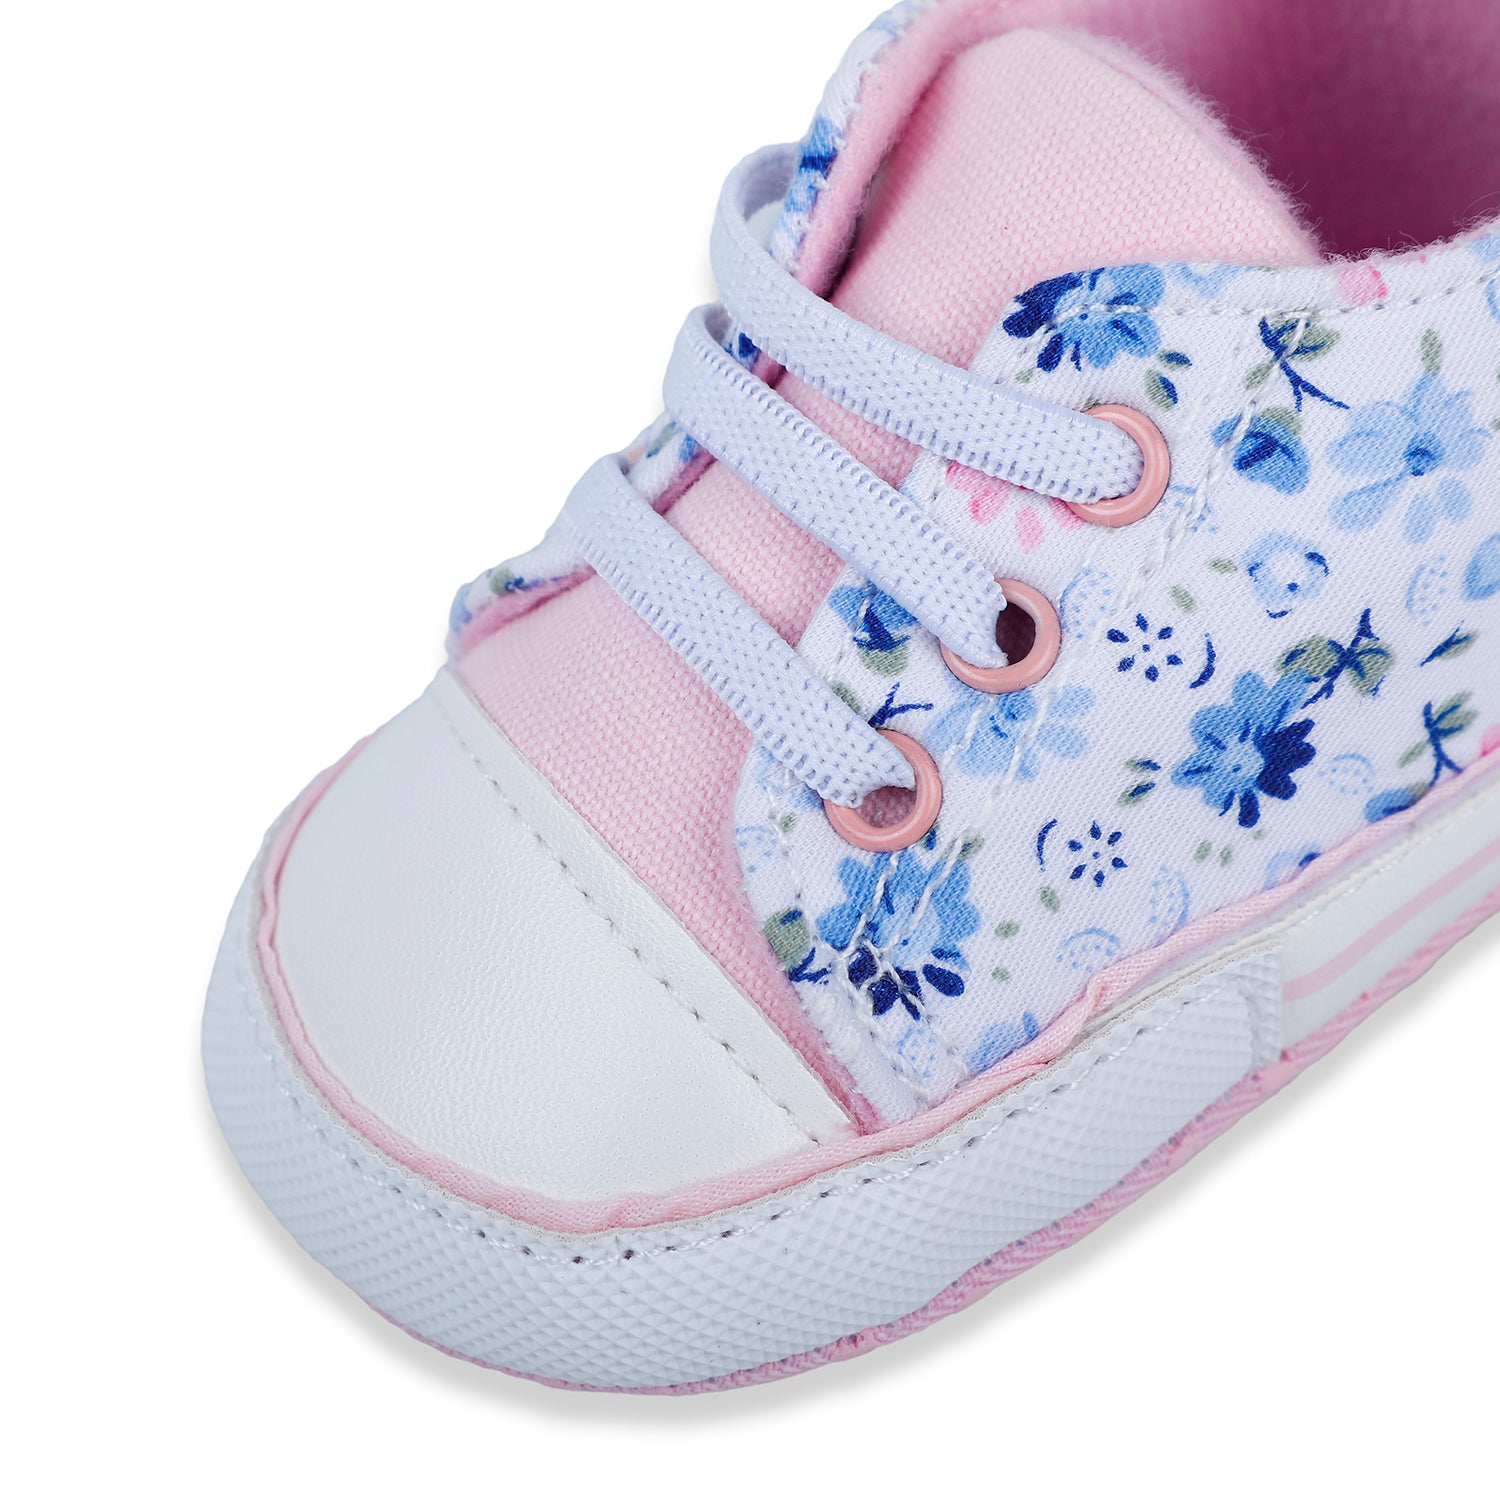 Baby Moo Floral Print Pink Lace Up Booties - Baby Moo